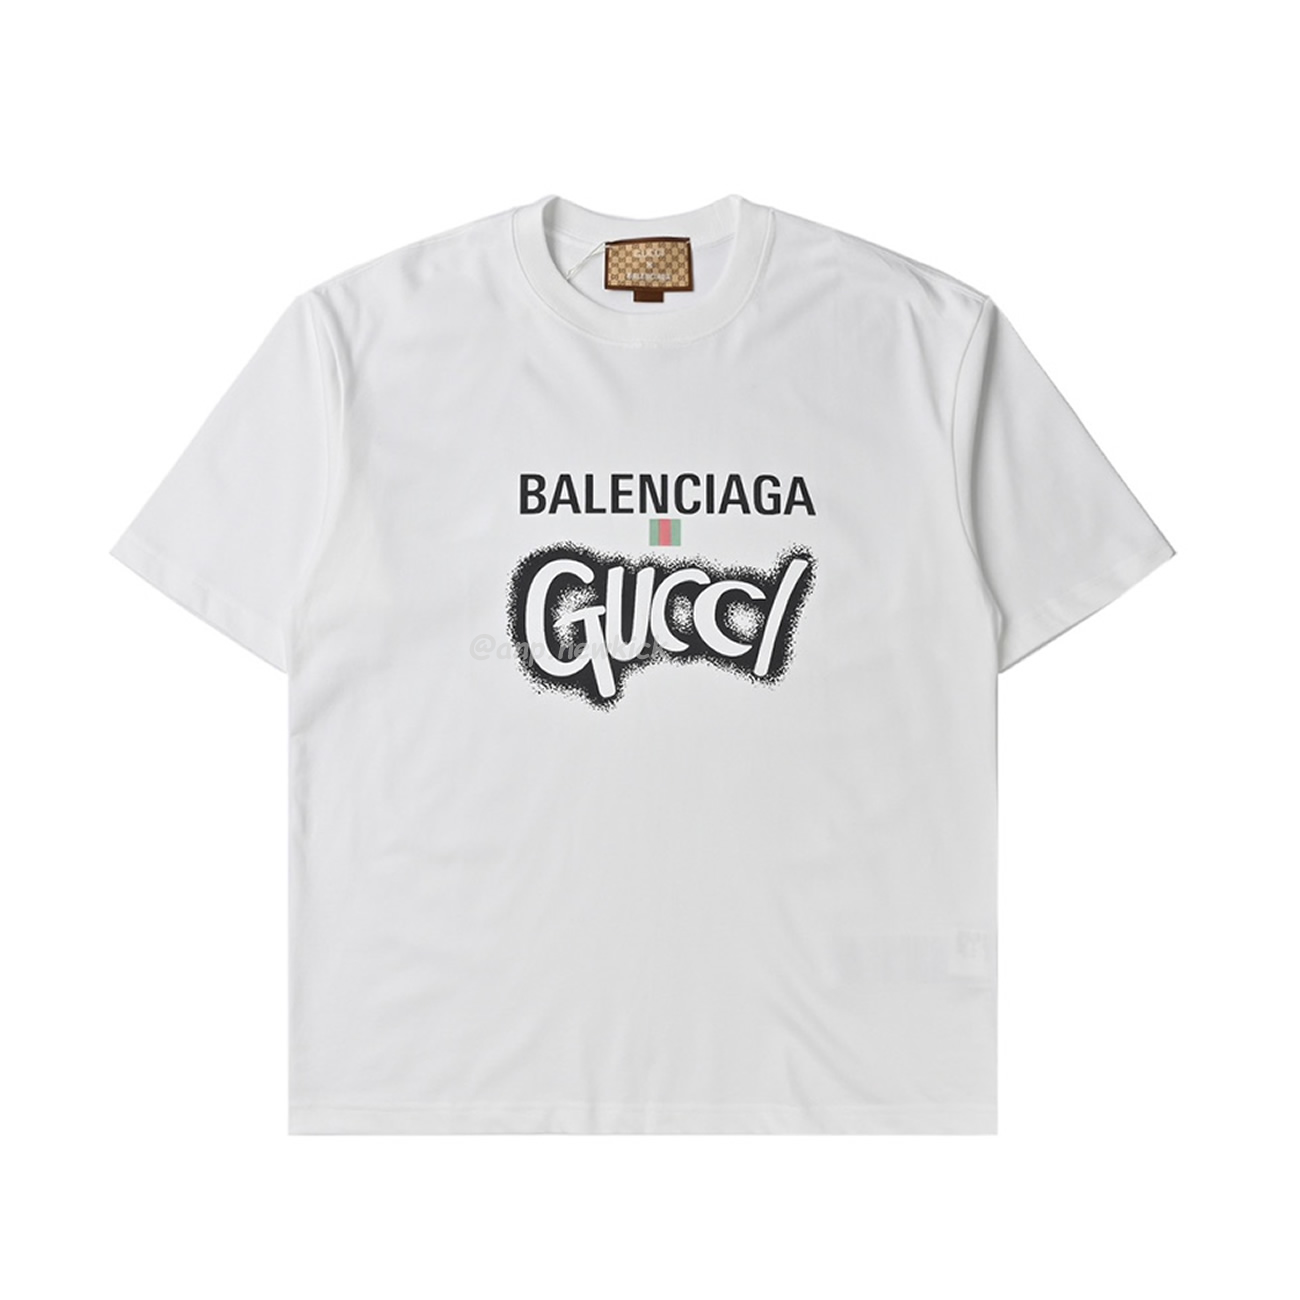 Balenciaga X Gucci Co Branded Double B Letter Printed Logo Printed Short Sleeved T Shirt (9) - newkick.org